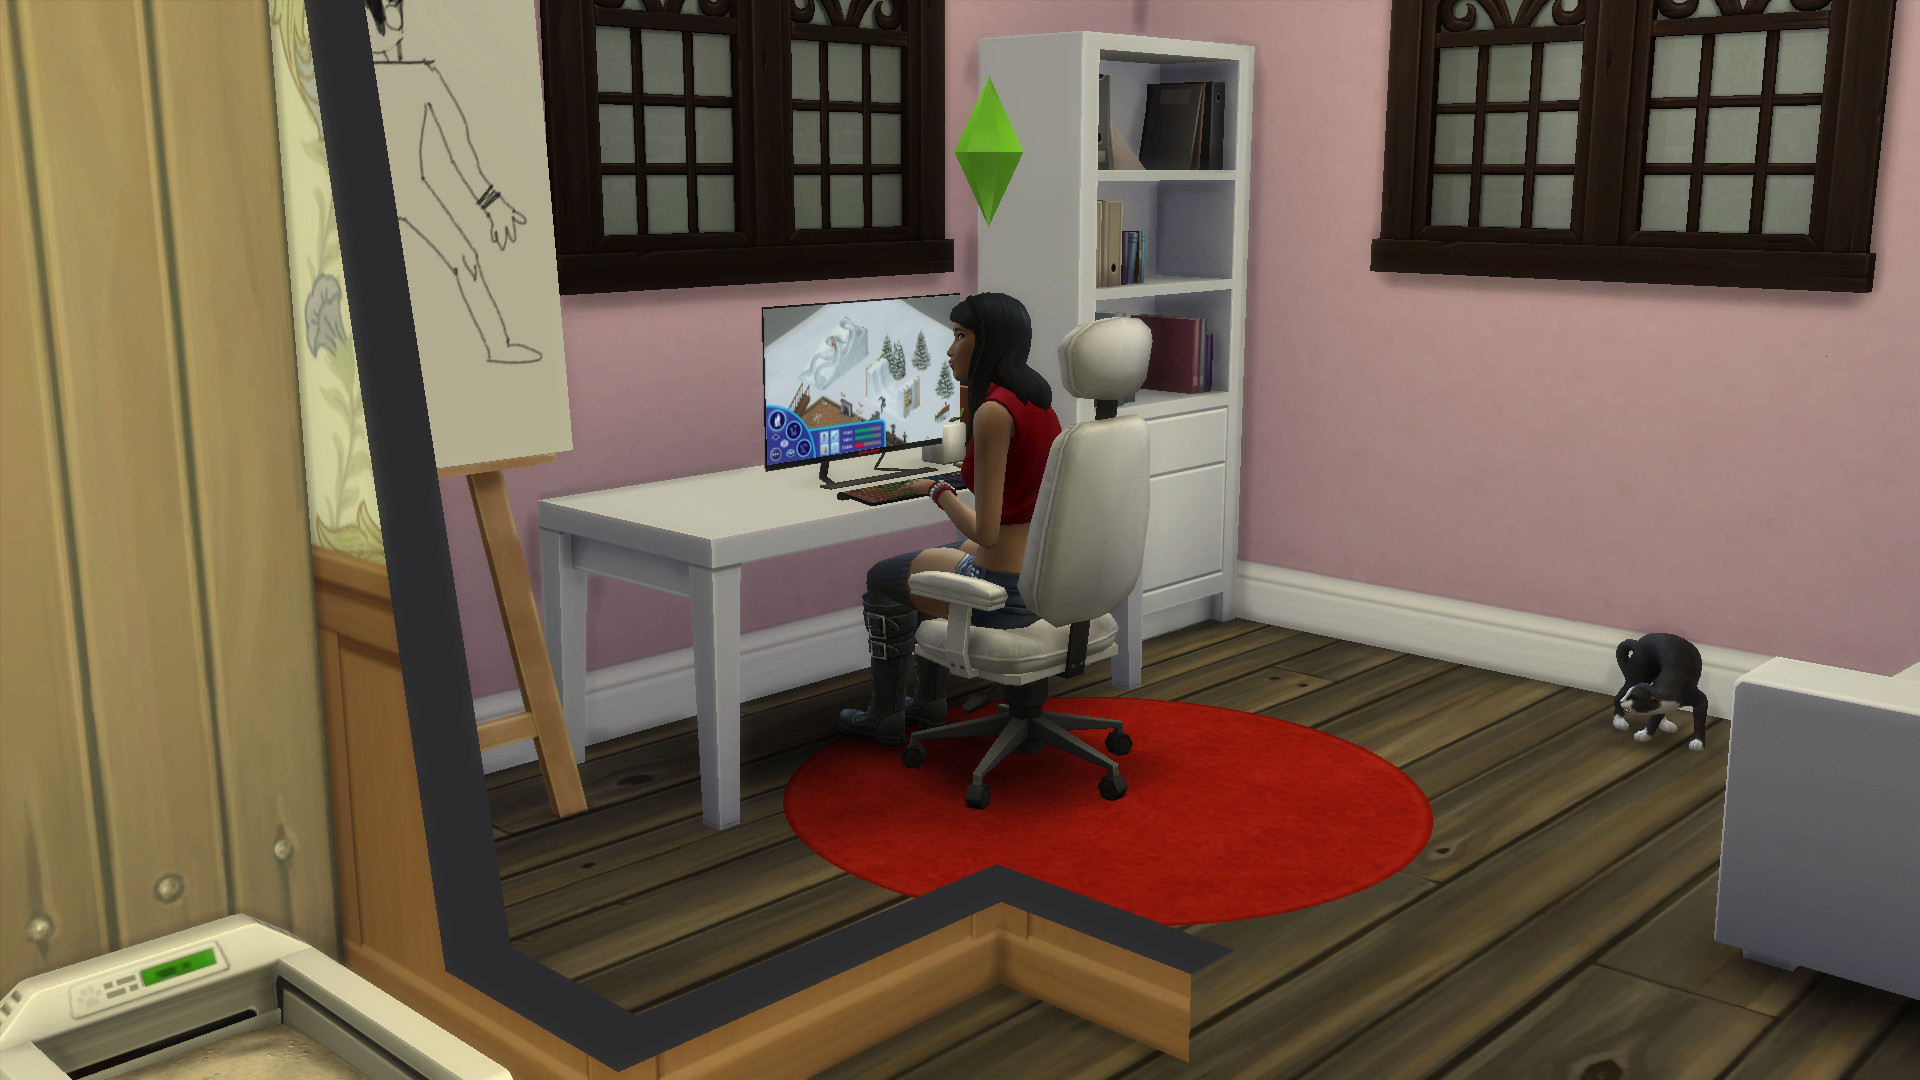 A Sim is playing The Sims on a computer with custom content.